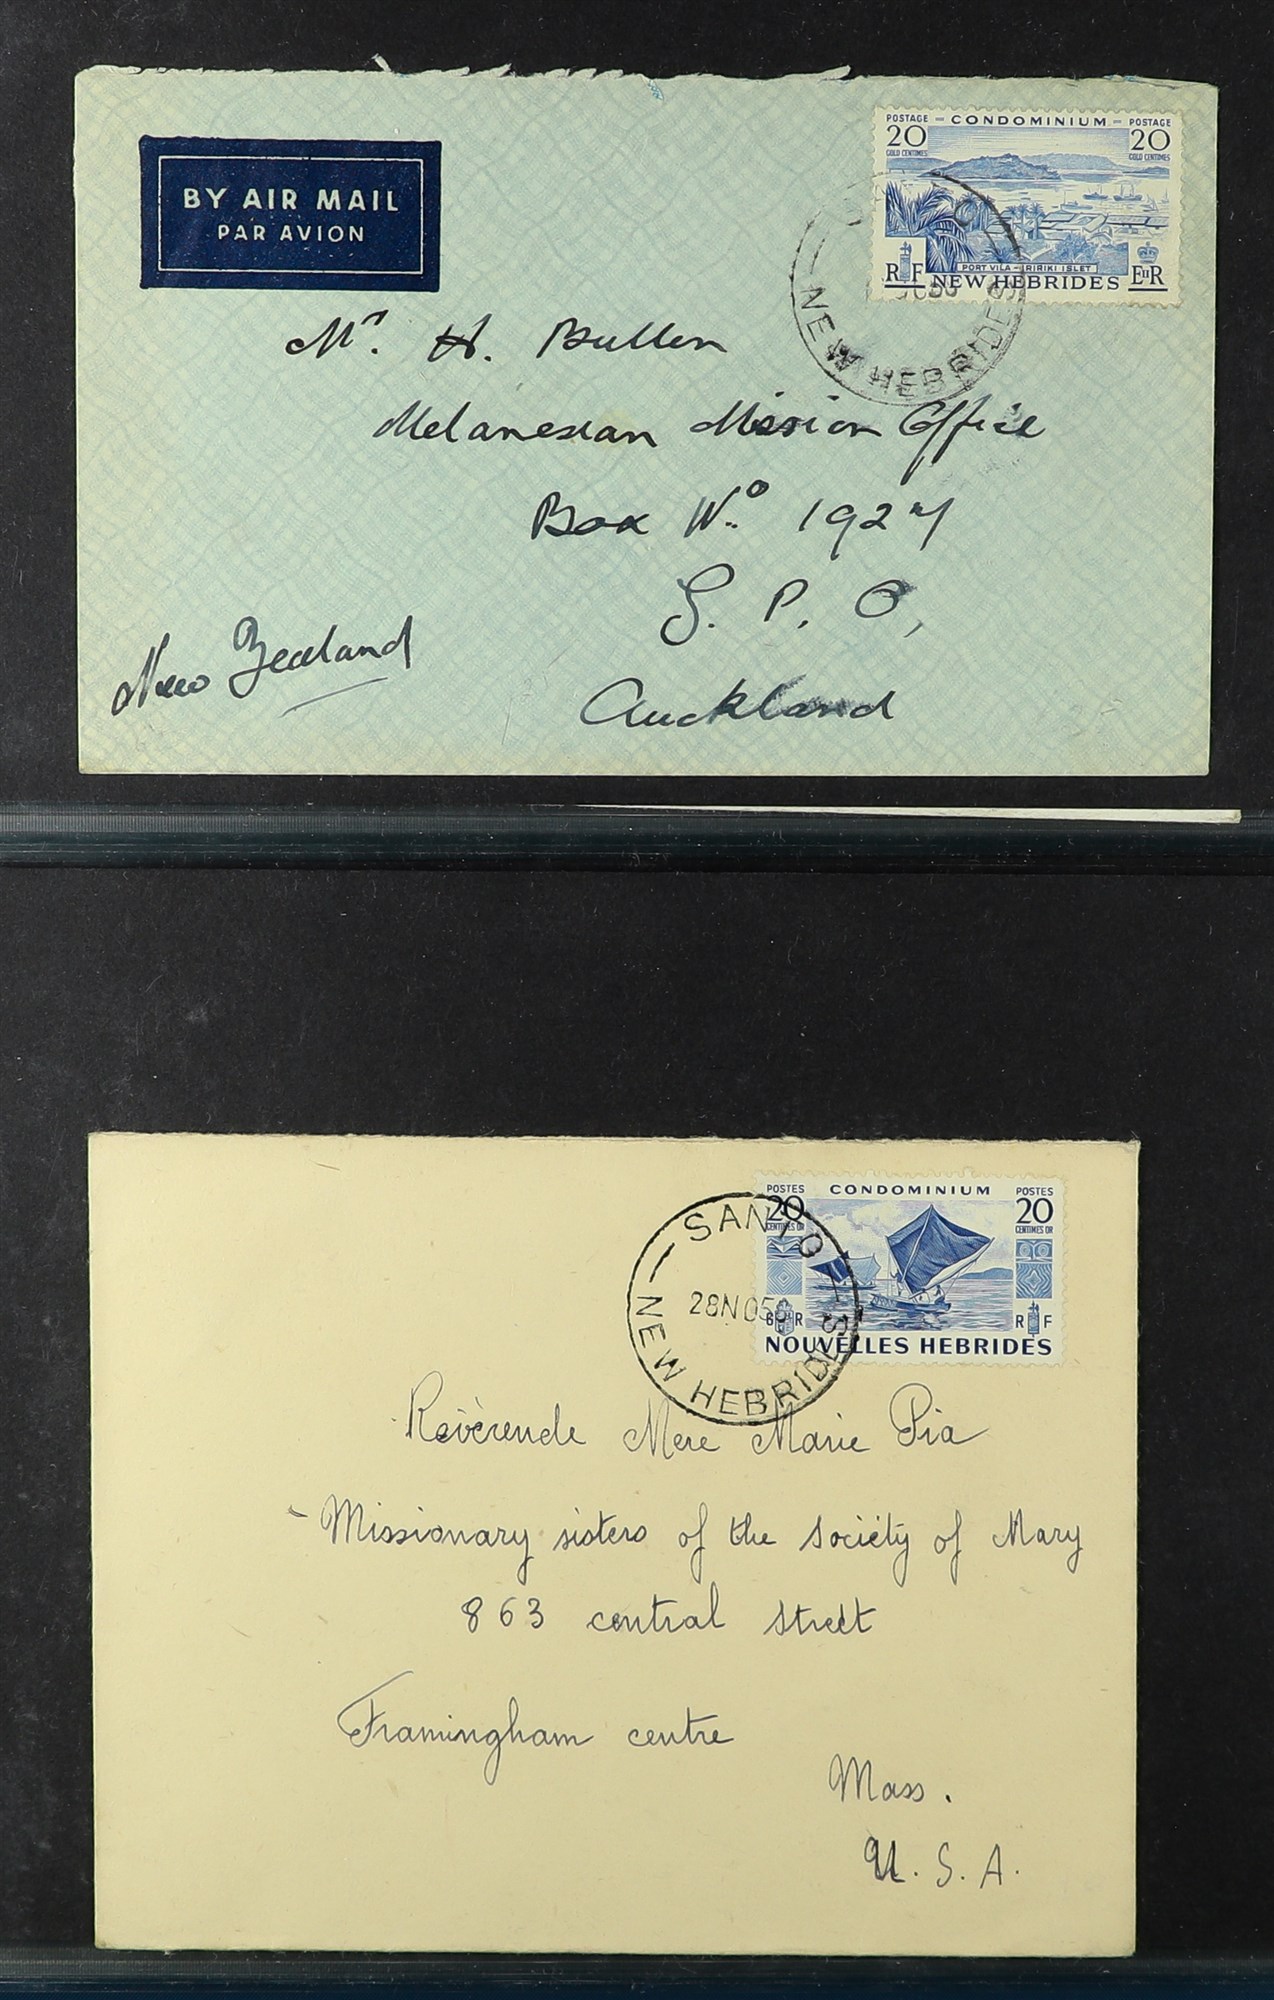 NEW HEBRIDES ENGLISH 1953-69 covers collection, with commercial & philatelic covers, registered - Image 5 of 15